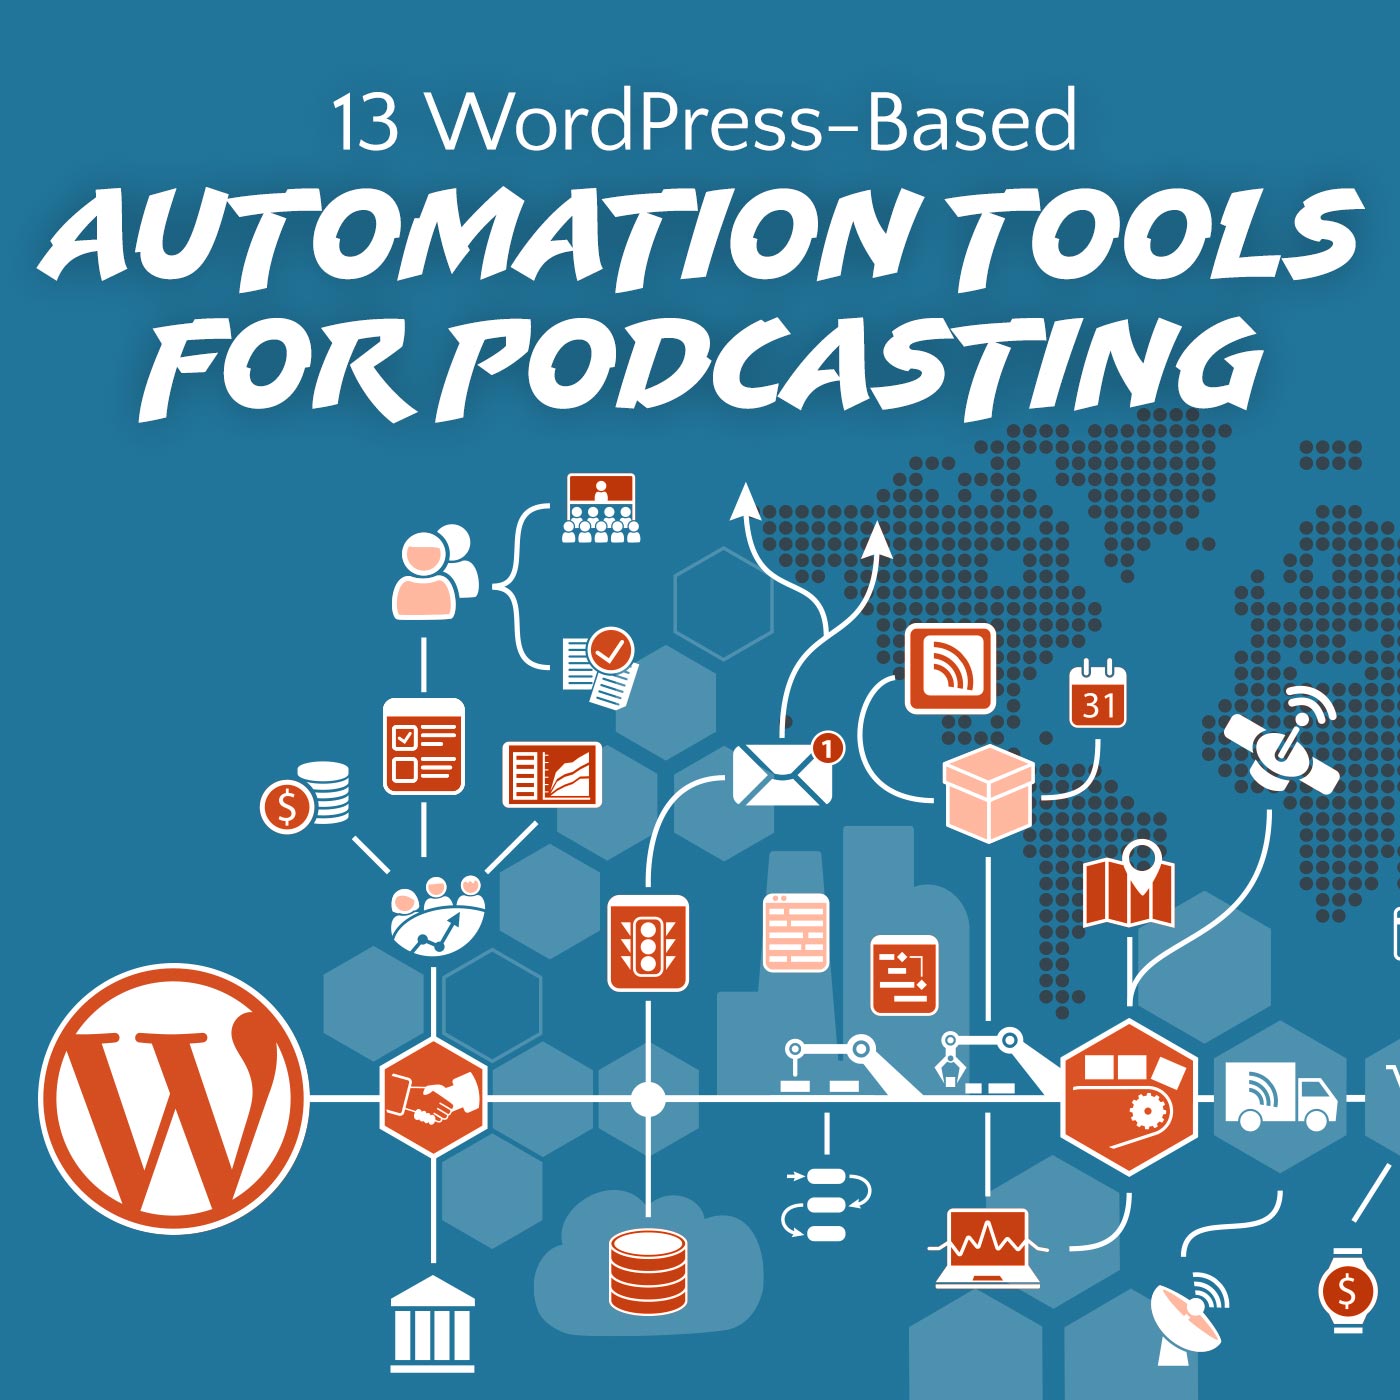 13 WordPress-Based Automation Tools for Podcasting